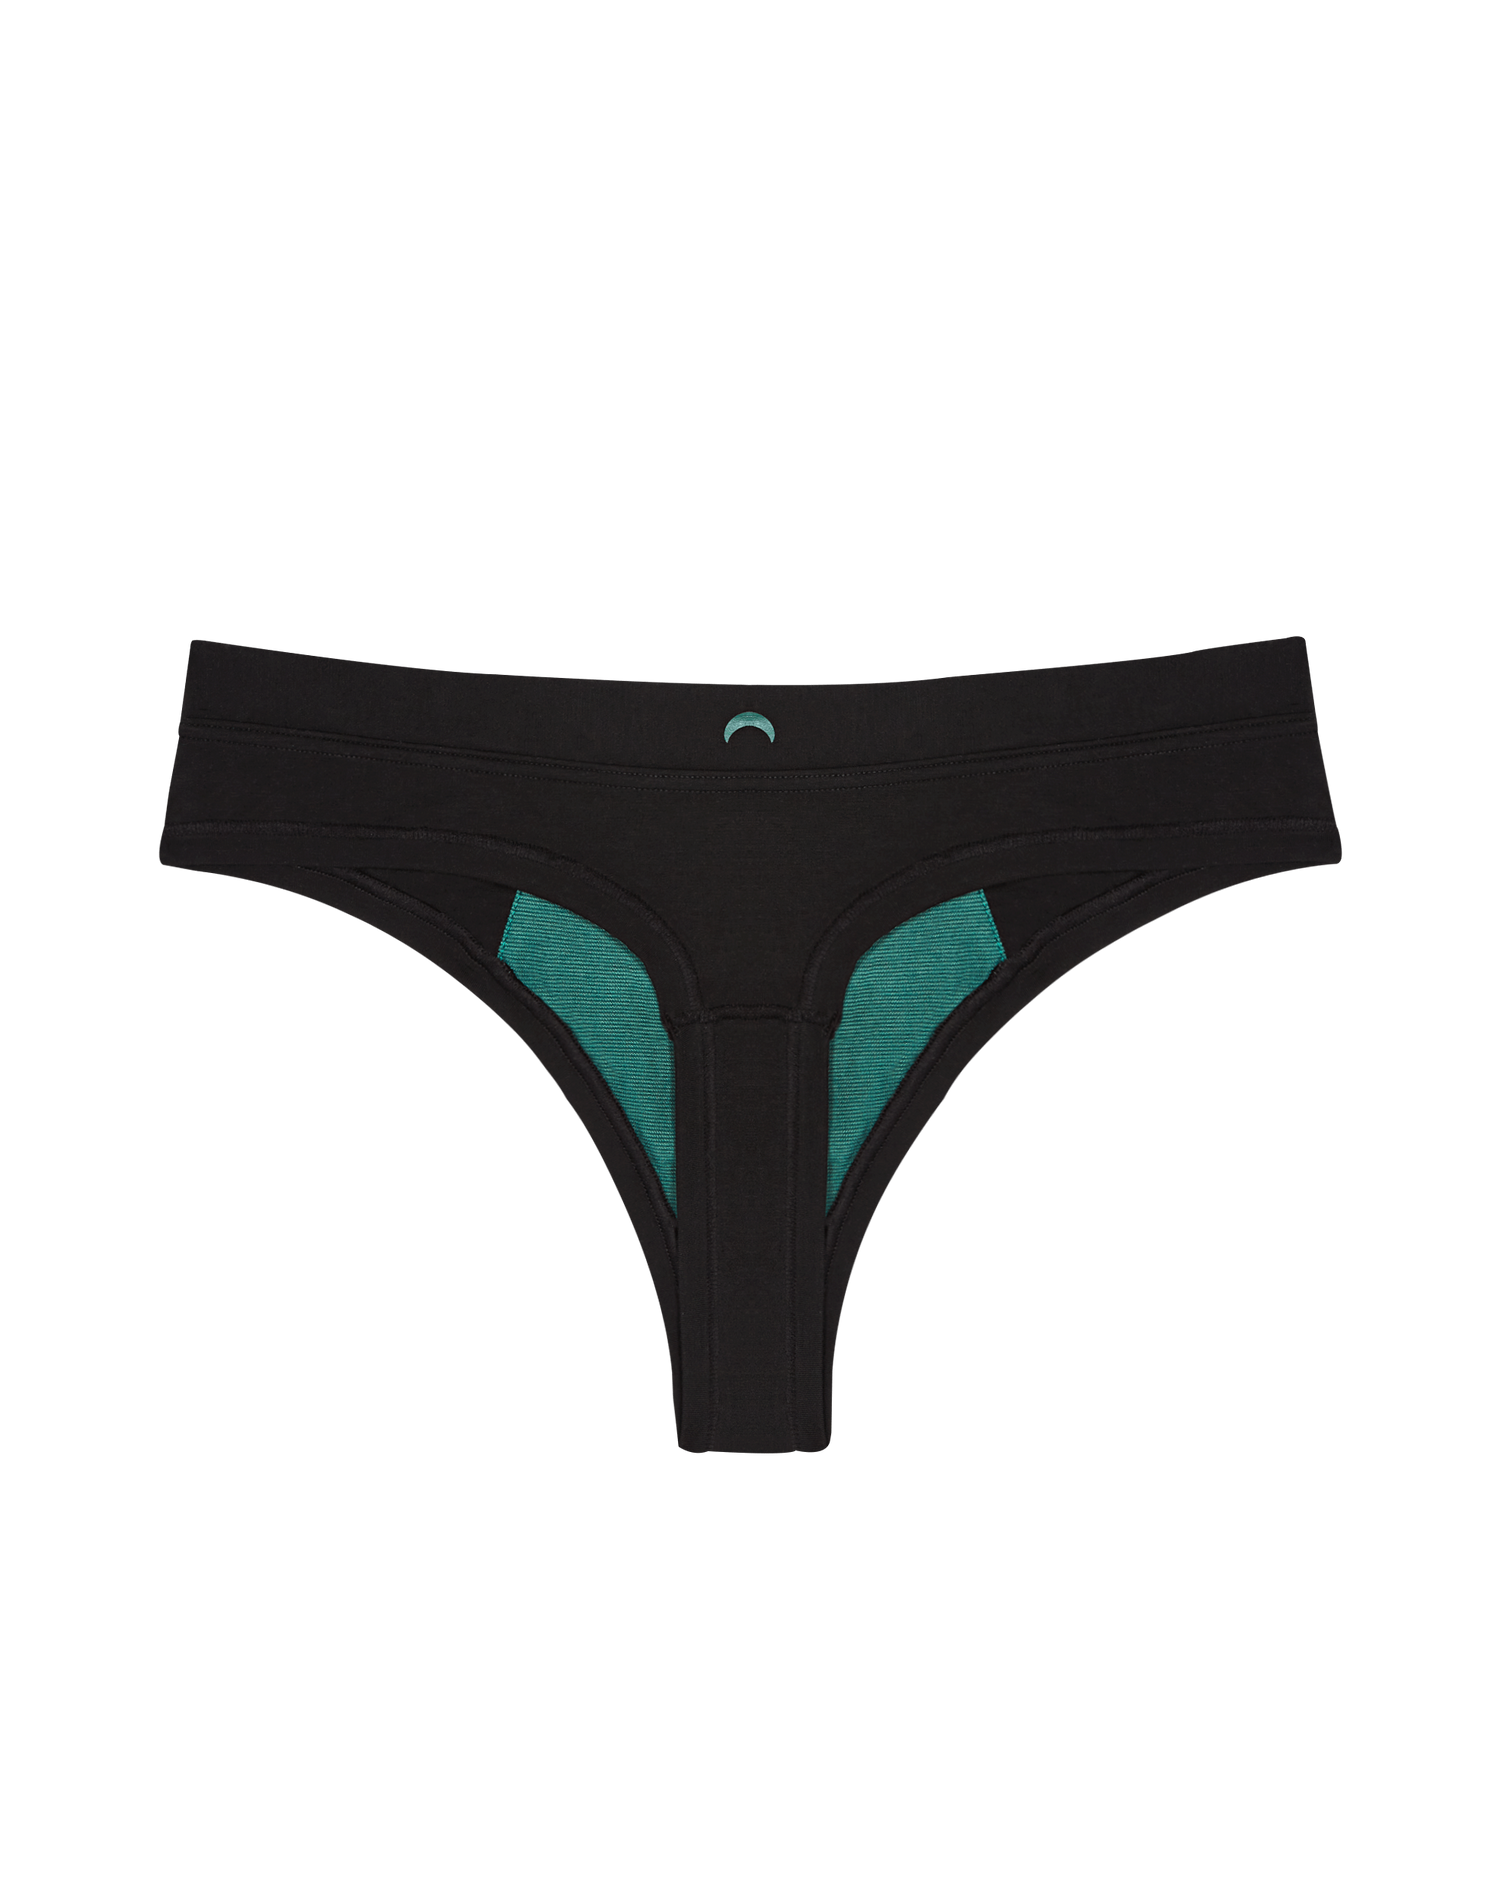 Seamless Underwear for sale in Vancouver, British Columbia